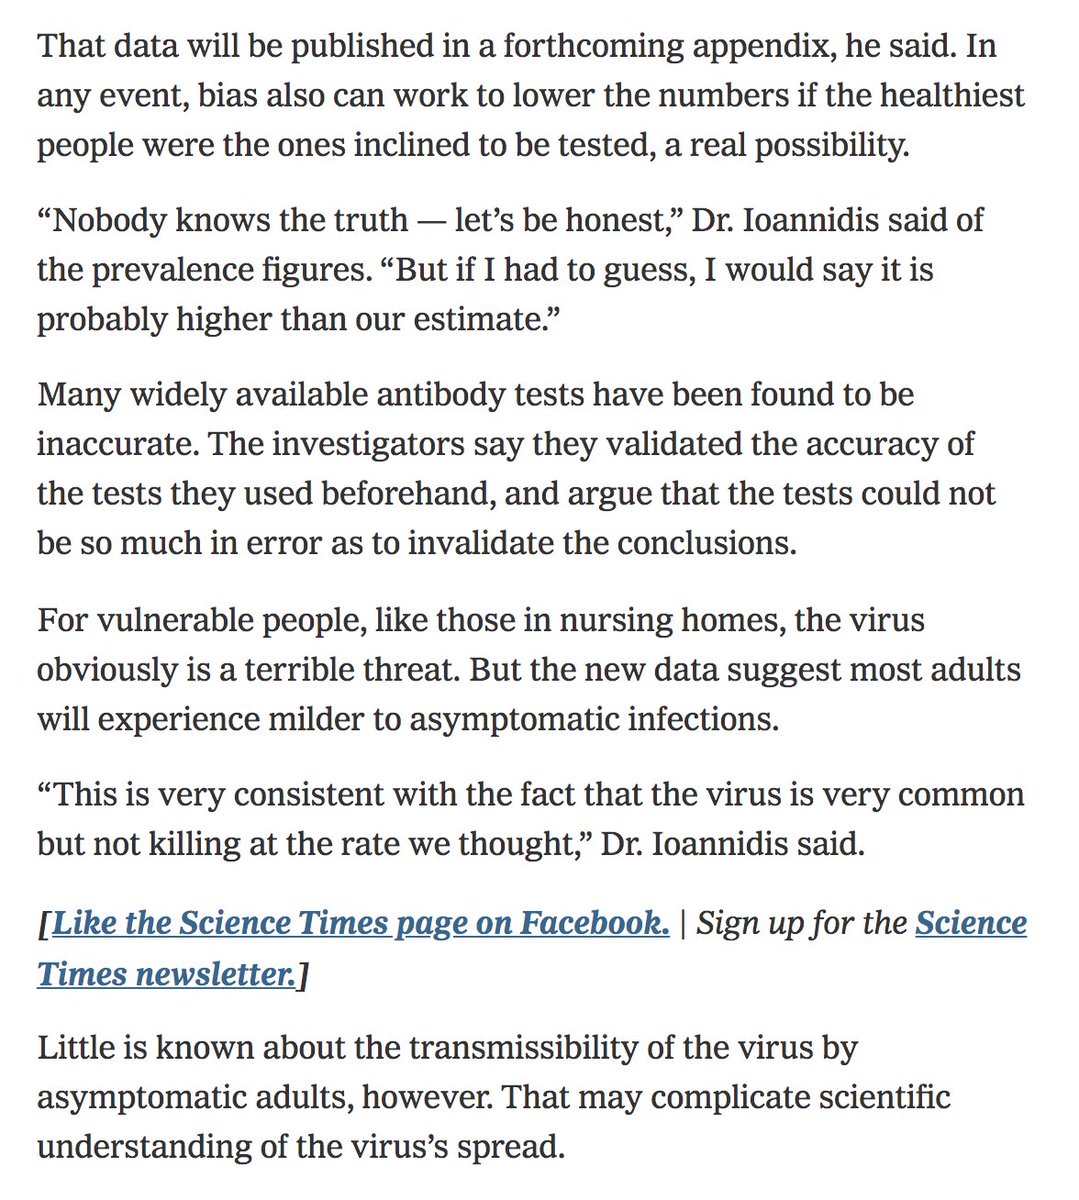 10/ Relevant sections of  @ginakolata piece  https://nyti.ms/3bt6Uaw  below, w/ 4 self-serving quotes from Ioannidis. Surprising and disappointing for  @NYTScience – this is lazy reporting.